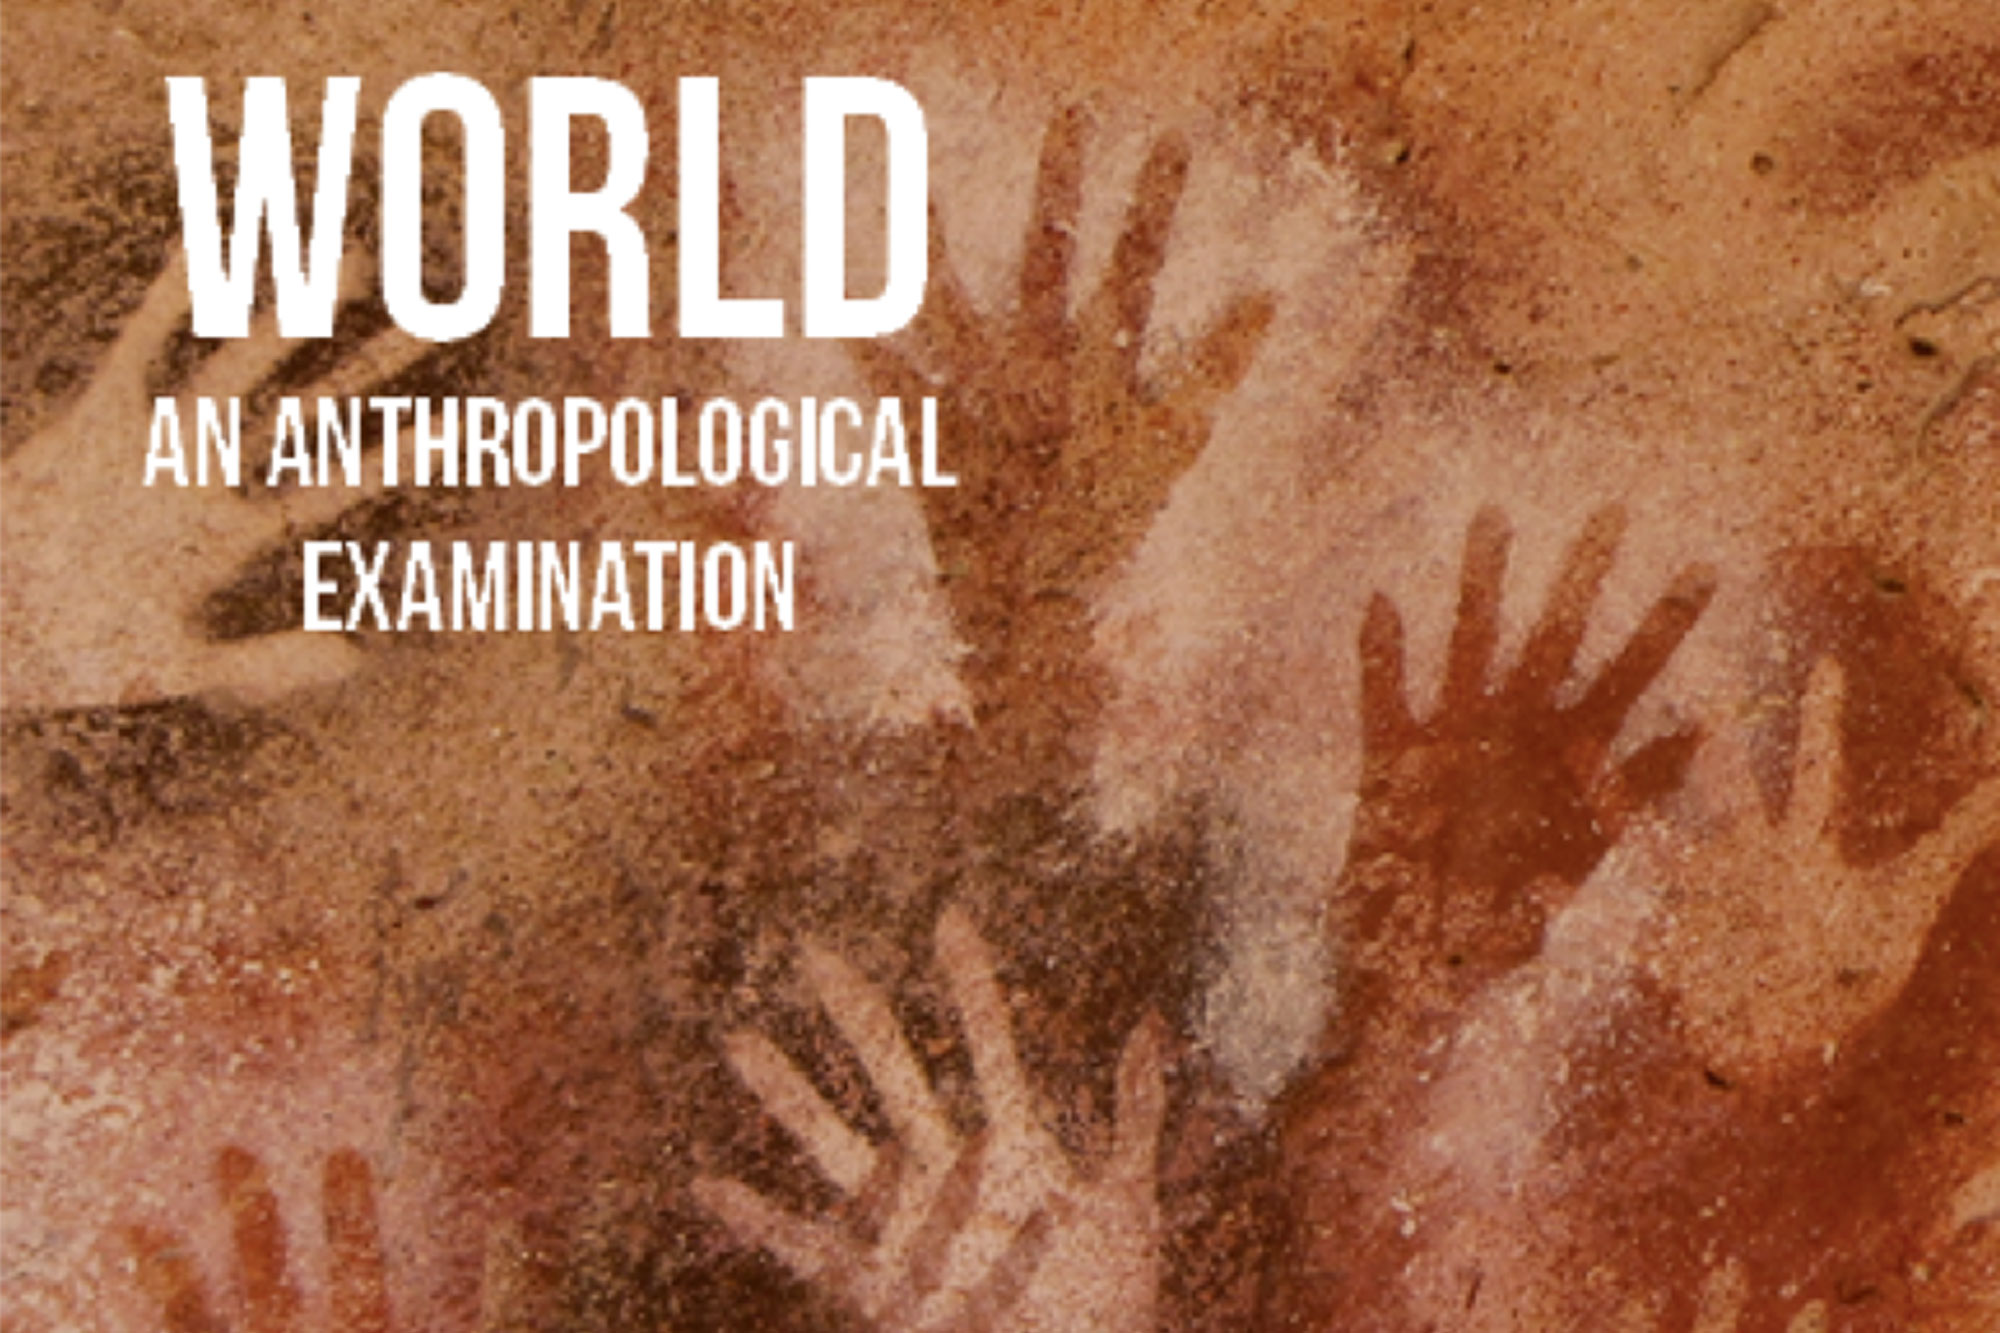 Cover detail of cover of World: An Anthropological Examination featuring stencilled hand prints from early cave art